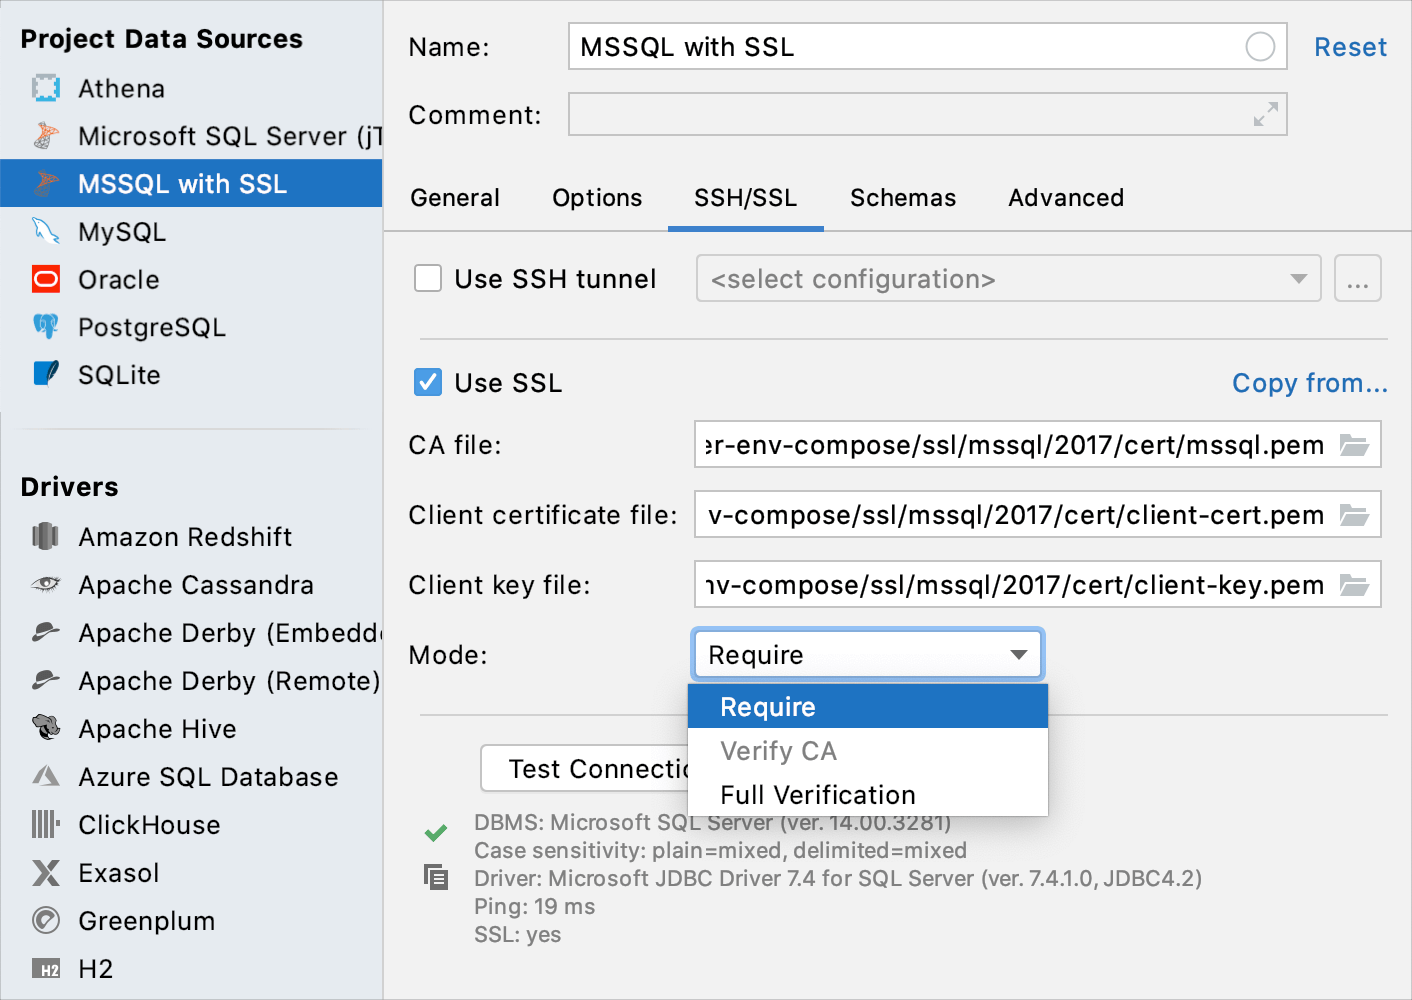 Connect to a database with SSL